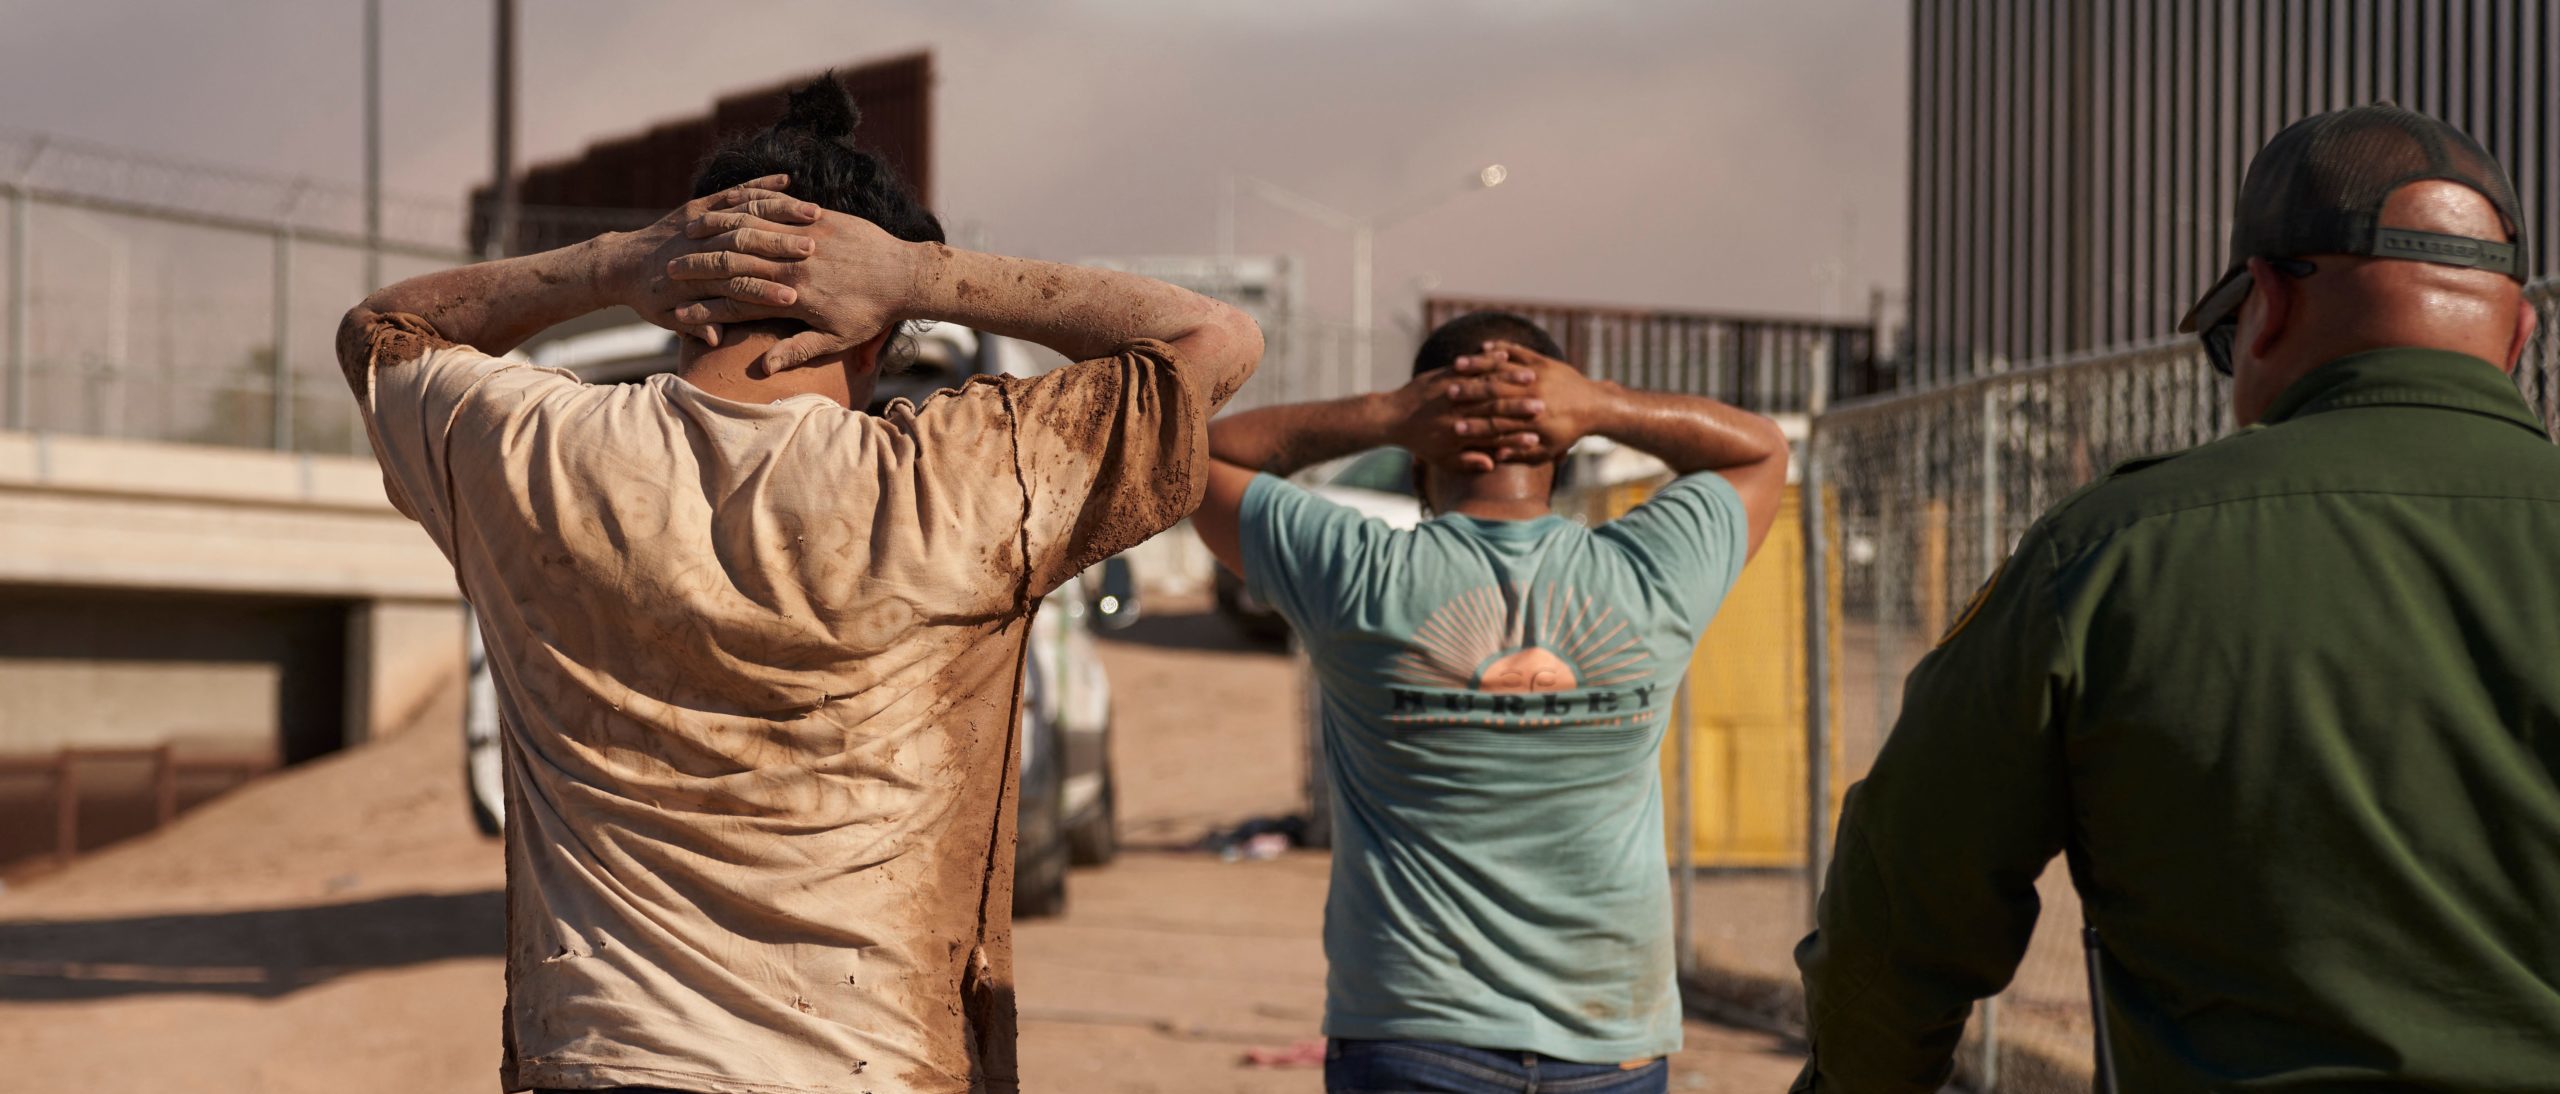 Migrants apprehended by US Border Patrol agents, walk with their hands on their heads after entering the United States illegally from Mexico on October 6, 2022 in Calexico, California. (Photo by ALLISON DINNER/AFP via Getty Images)